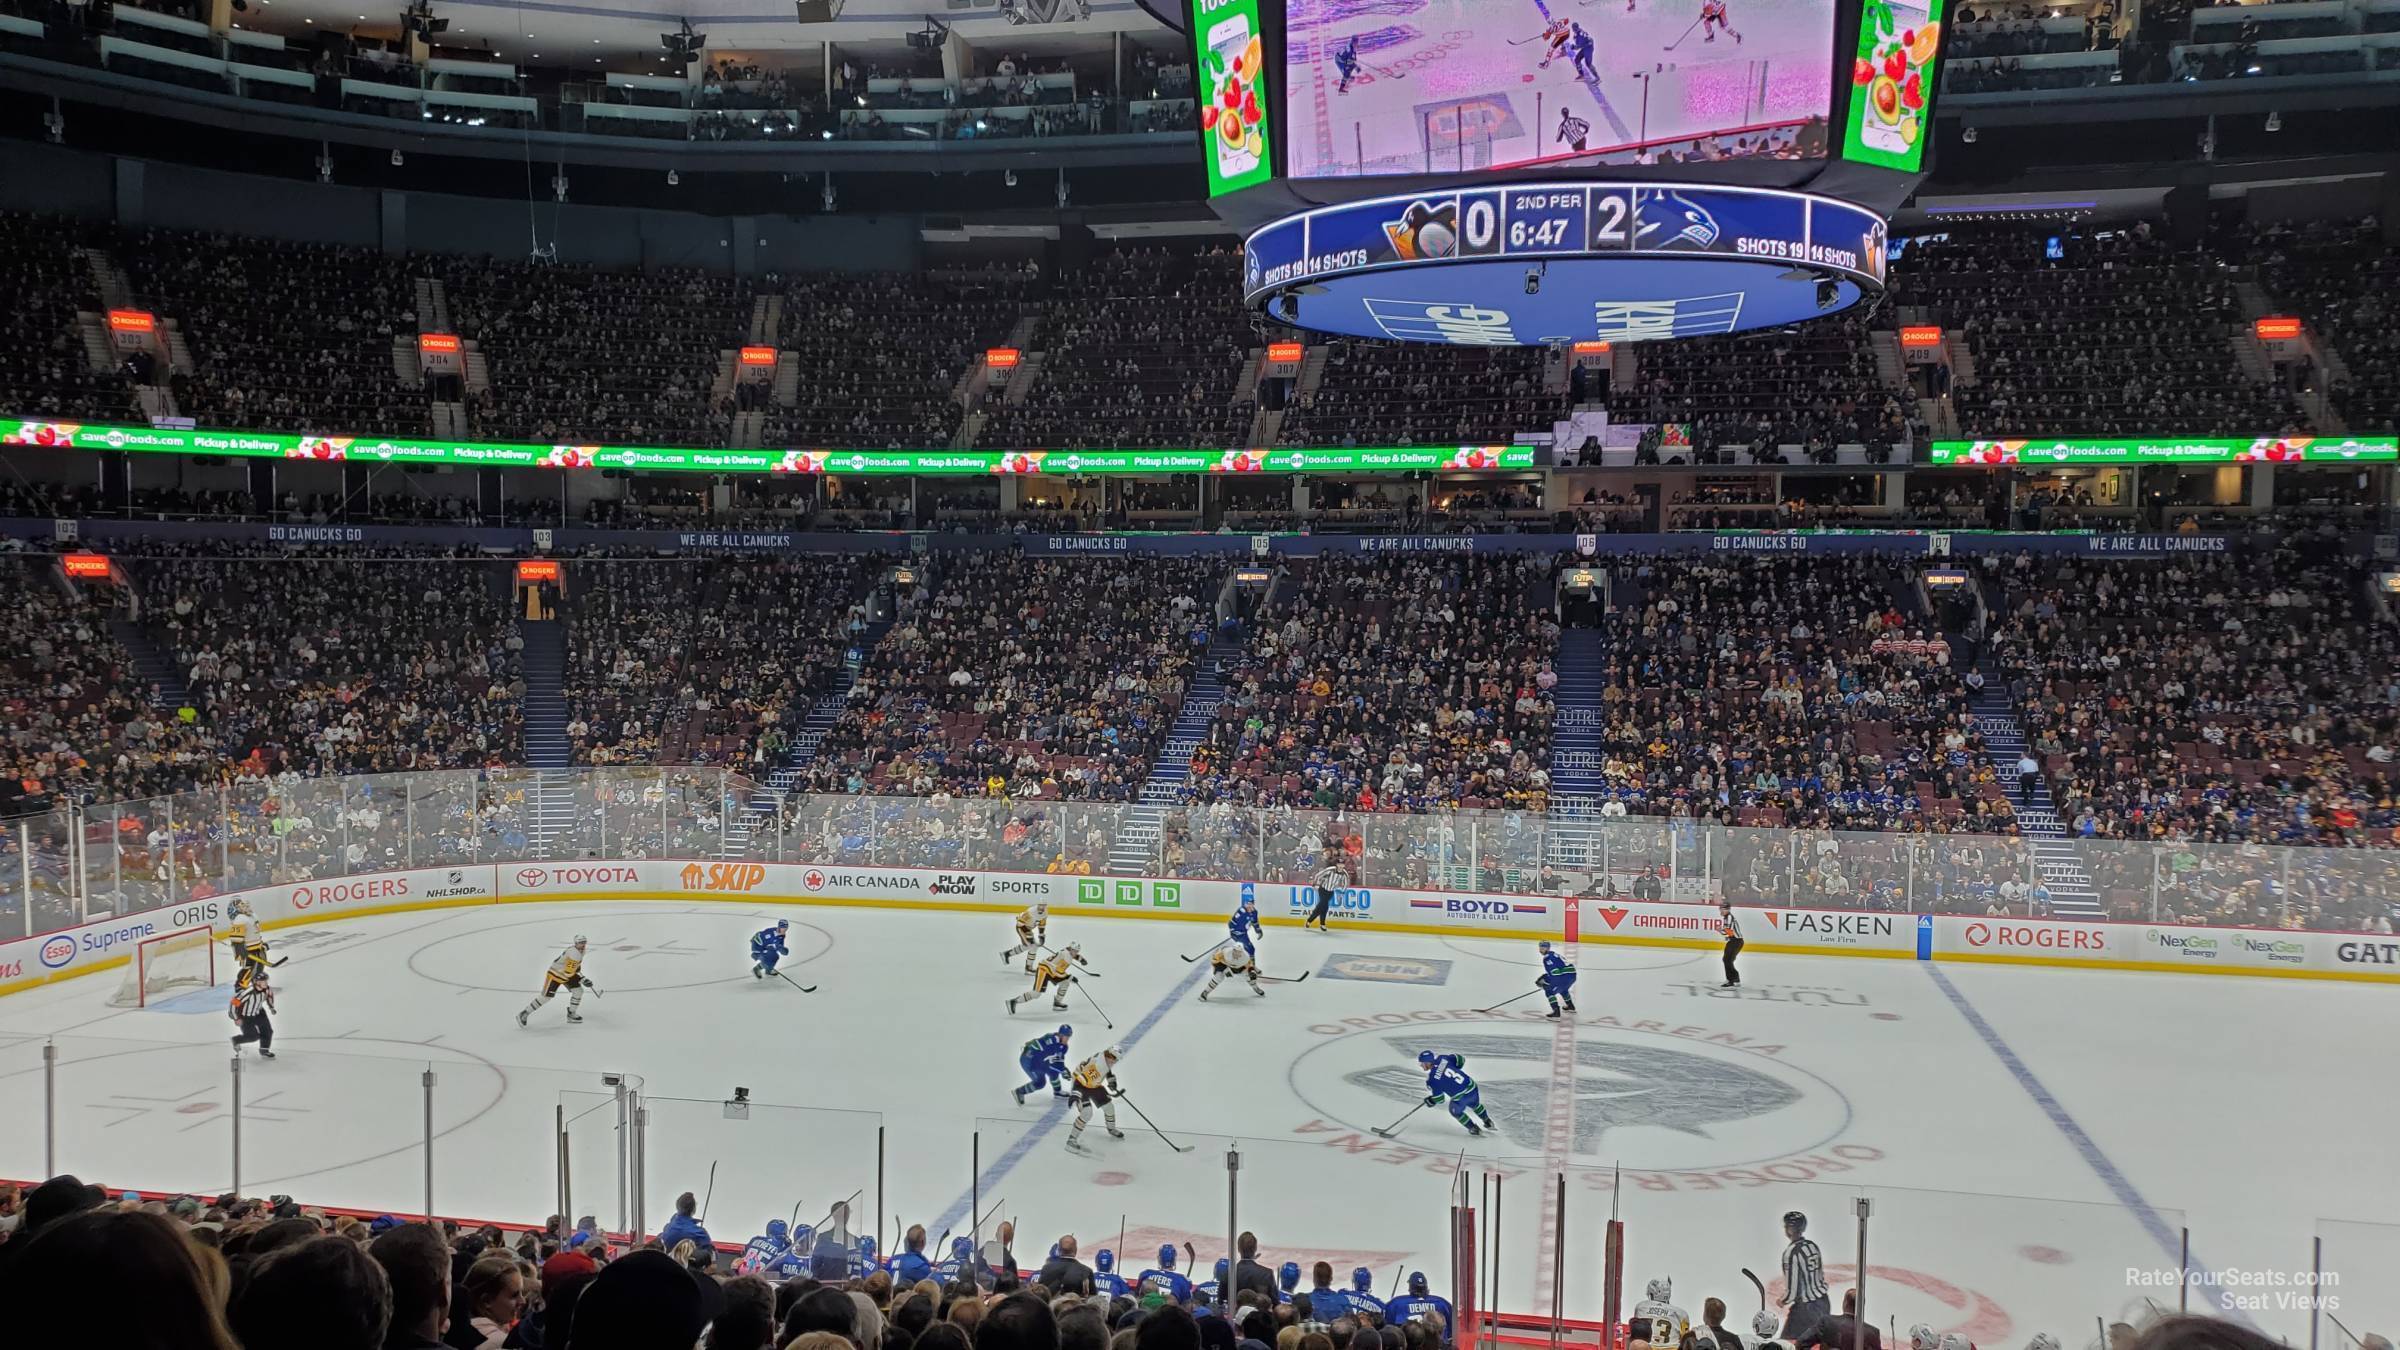 section 117, row 21 seat view  for hockey - rogers arena